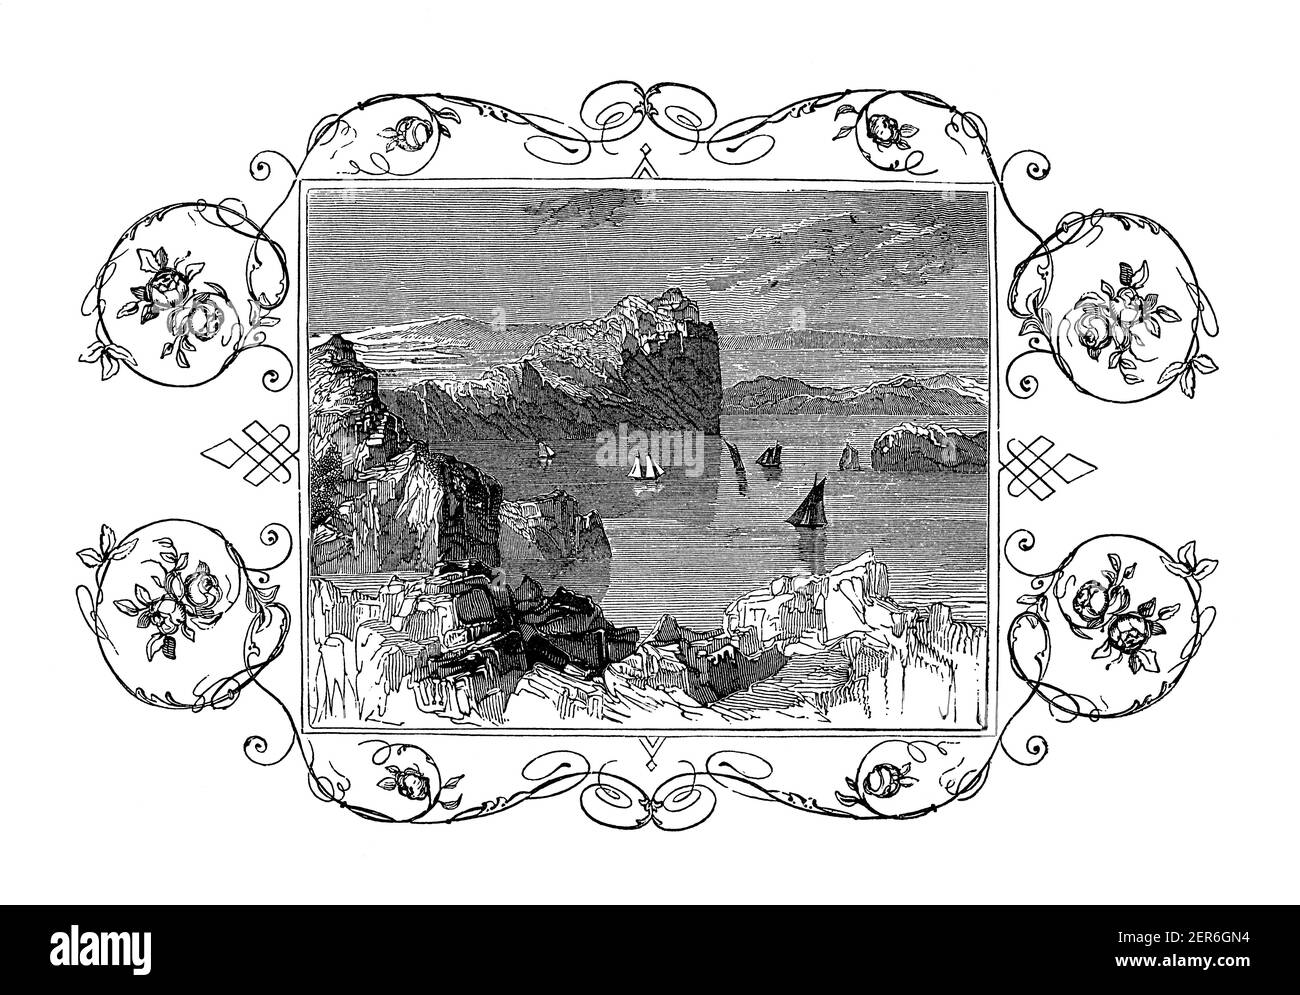 19th-century view of Saratoga Lake in the U.S. state of New York. Illustration published in The Pictorial Life of General Washington by J. Frost, LL.D Stock Photo